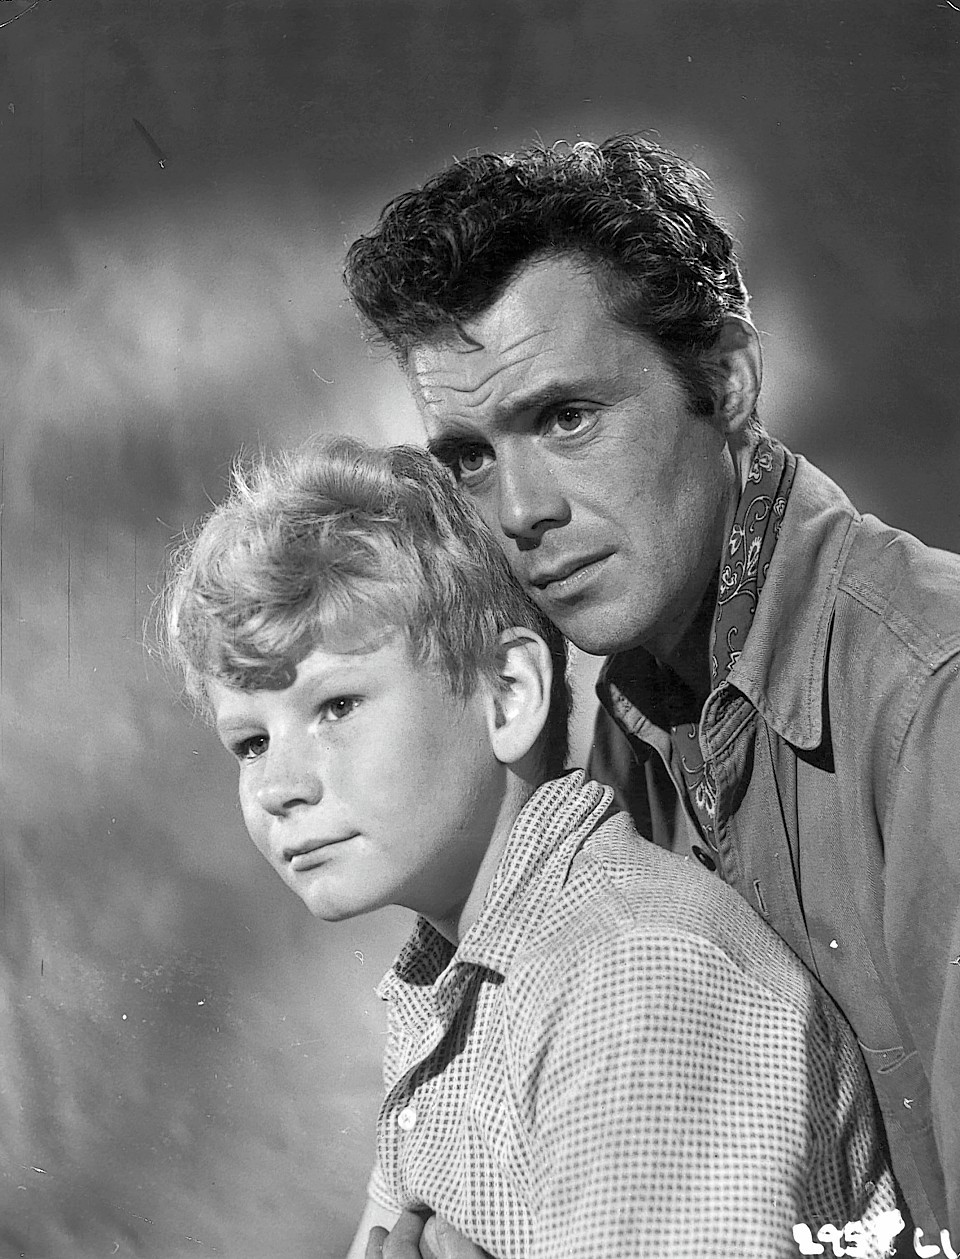 A young Jon Whiteley with Dirk Bogarde in The Spanish Gardener